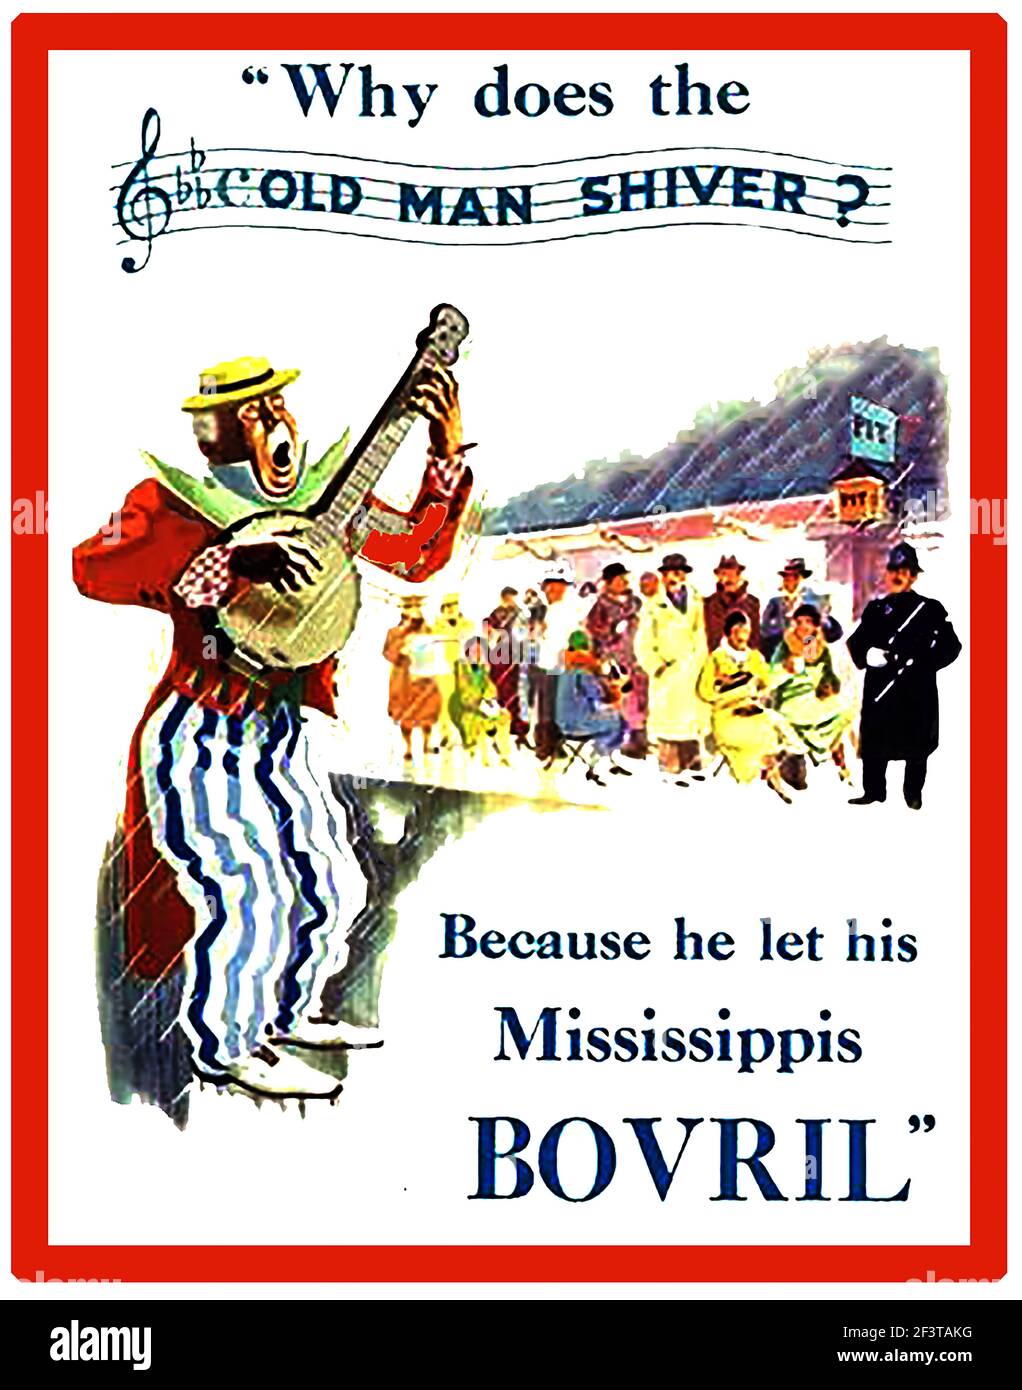 An early British advertisement for Bovril showing a minstrel playing to a cinema queue crowd  in the ran with a British Bobby (policeman) standing by. Stock Photo